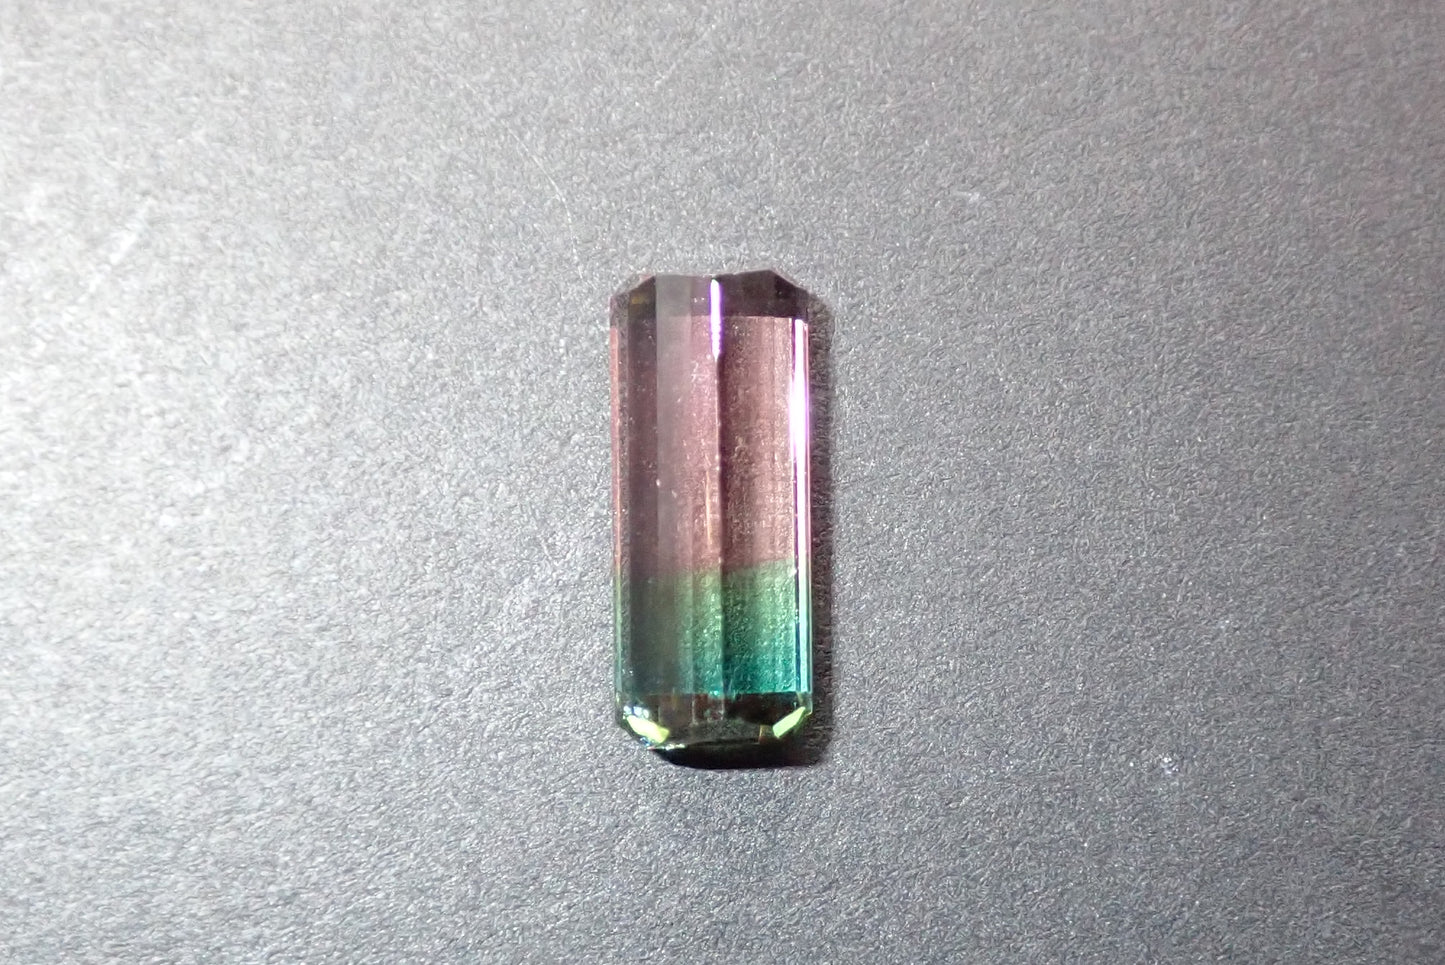 Party Colored Tourmaline 2.995ct